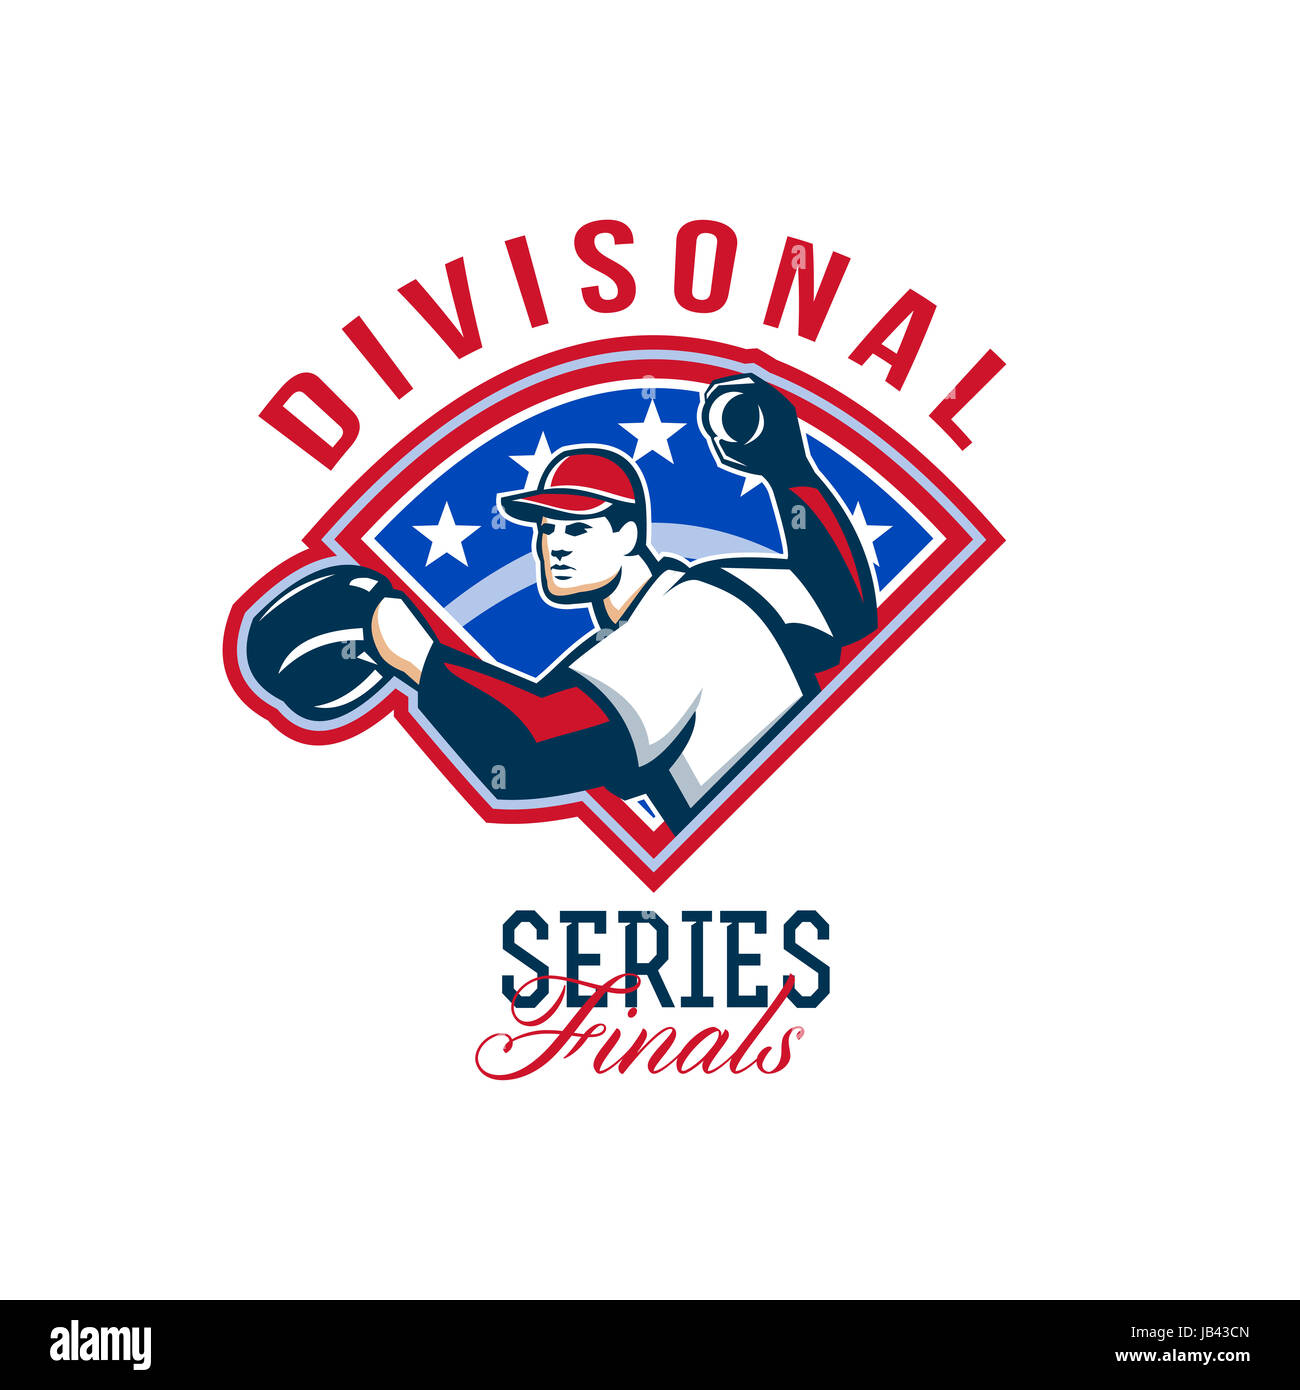 Illustration of a american baseball player pitcher outfielder throwing ball with words Divisional Series Finals. Stock Photo